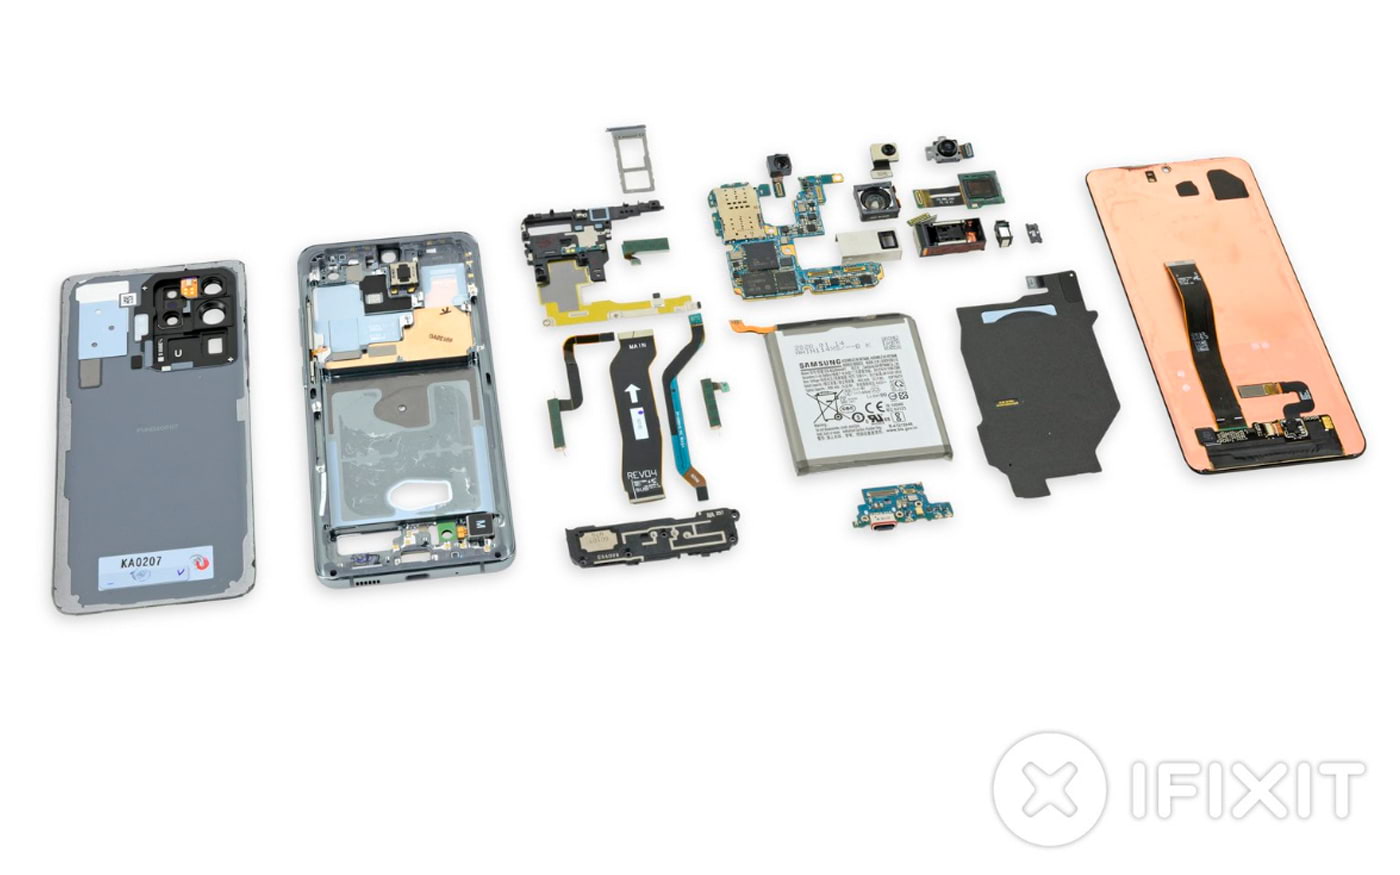 IFixIt disassembles the Galaxy S20 Ultra and smartphone receives a score of 3 on repairability